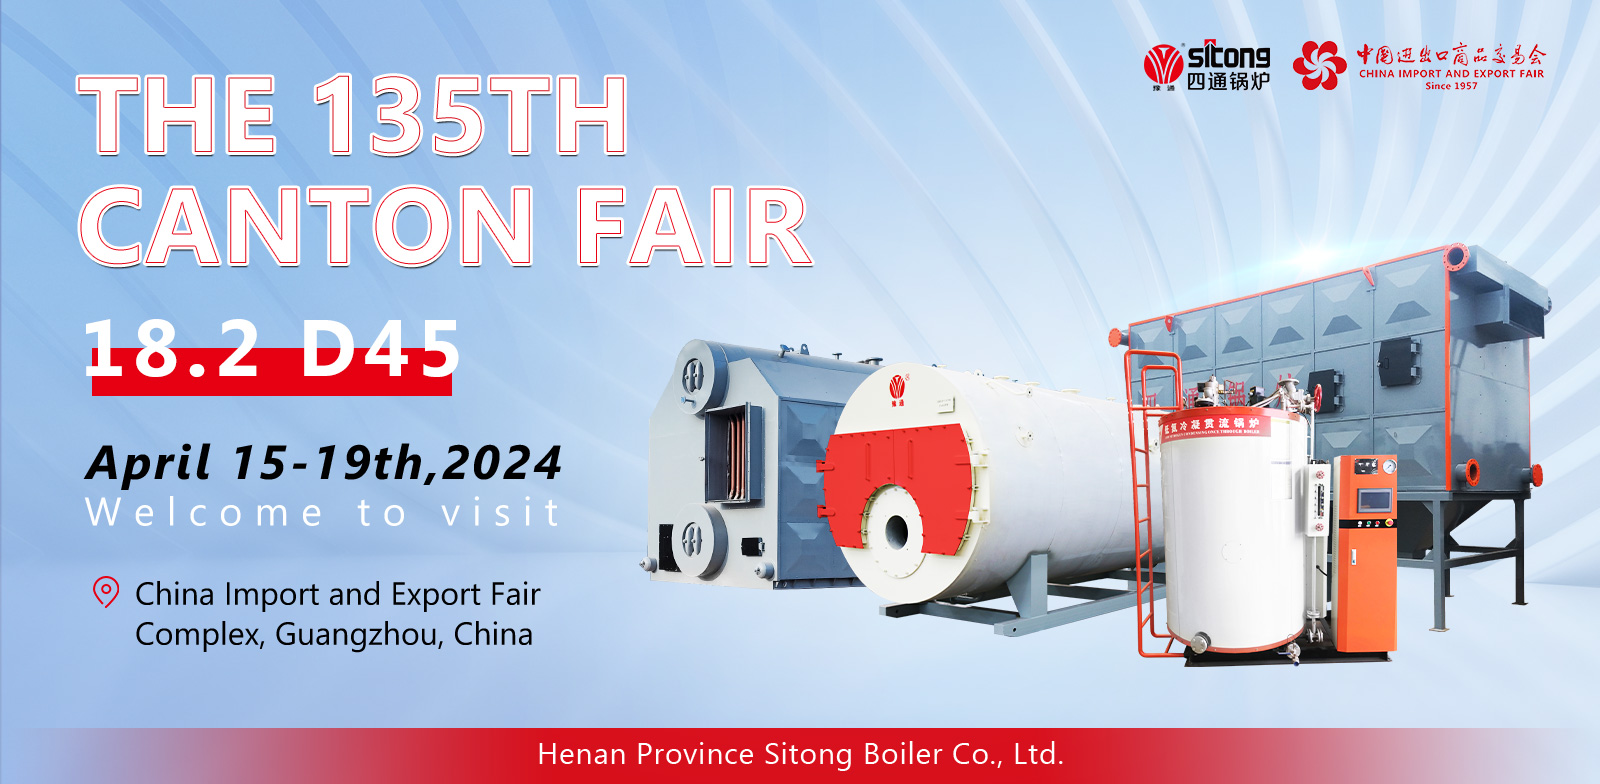 Sitong Boiler Sincerely Waiting for You Visiting Our Booth at the Canton Fair from 15th -19th April